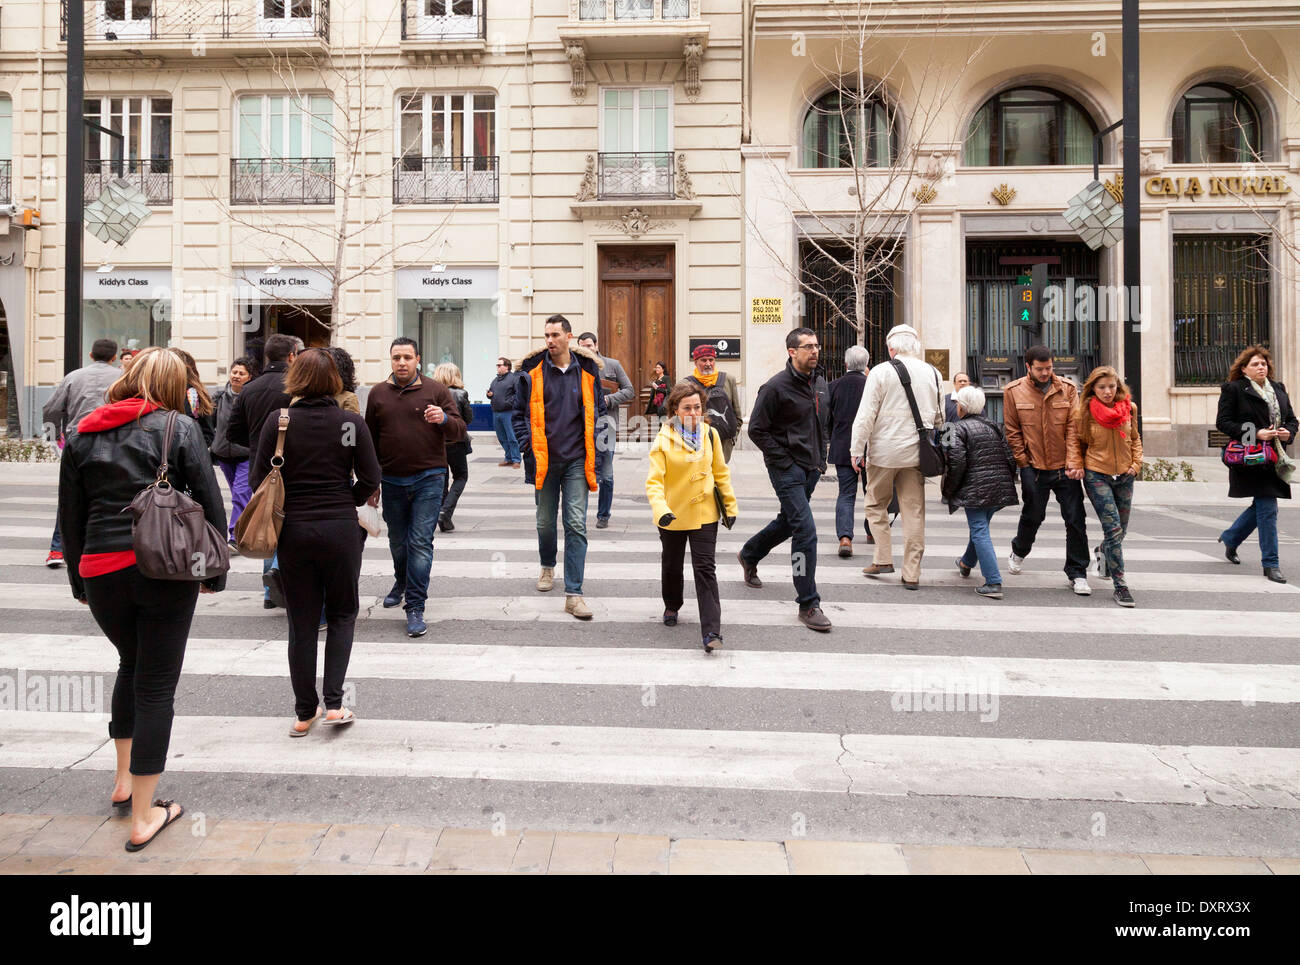 Pedestrians crossing a street in Spain; - Spanish people in Granada, Andalusia, Spain Europe Stock Photo